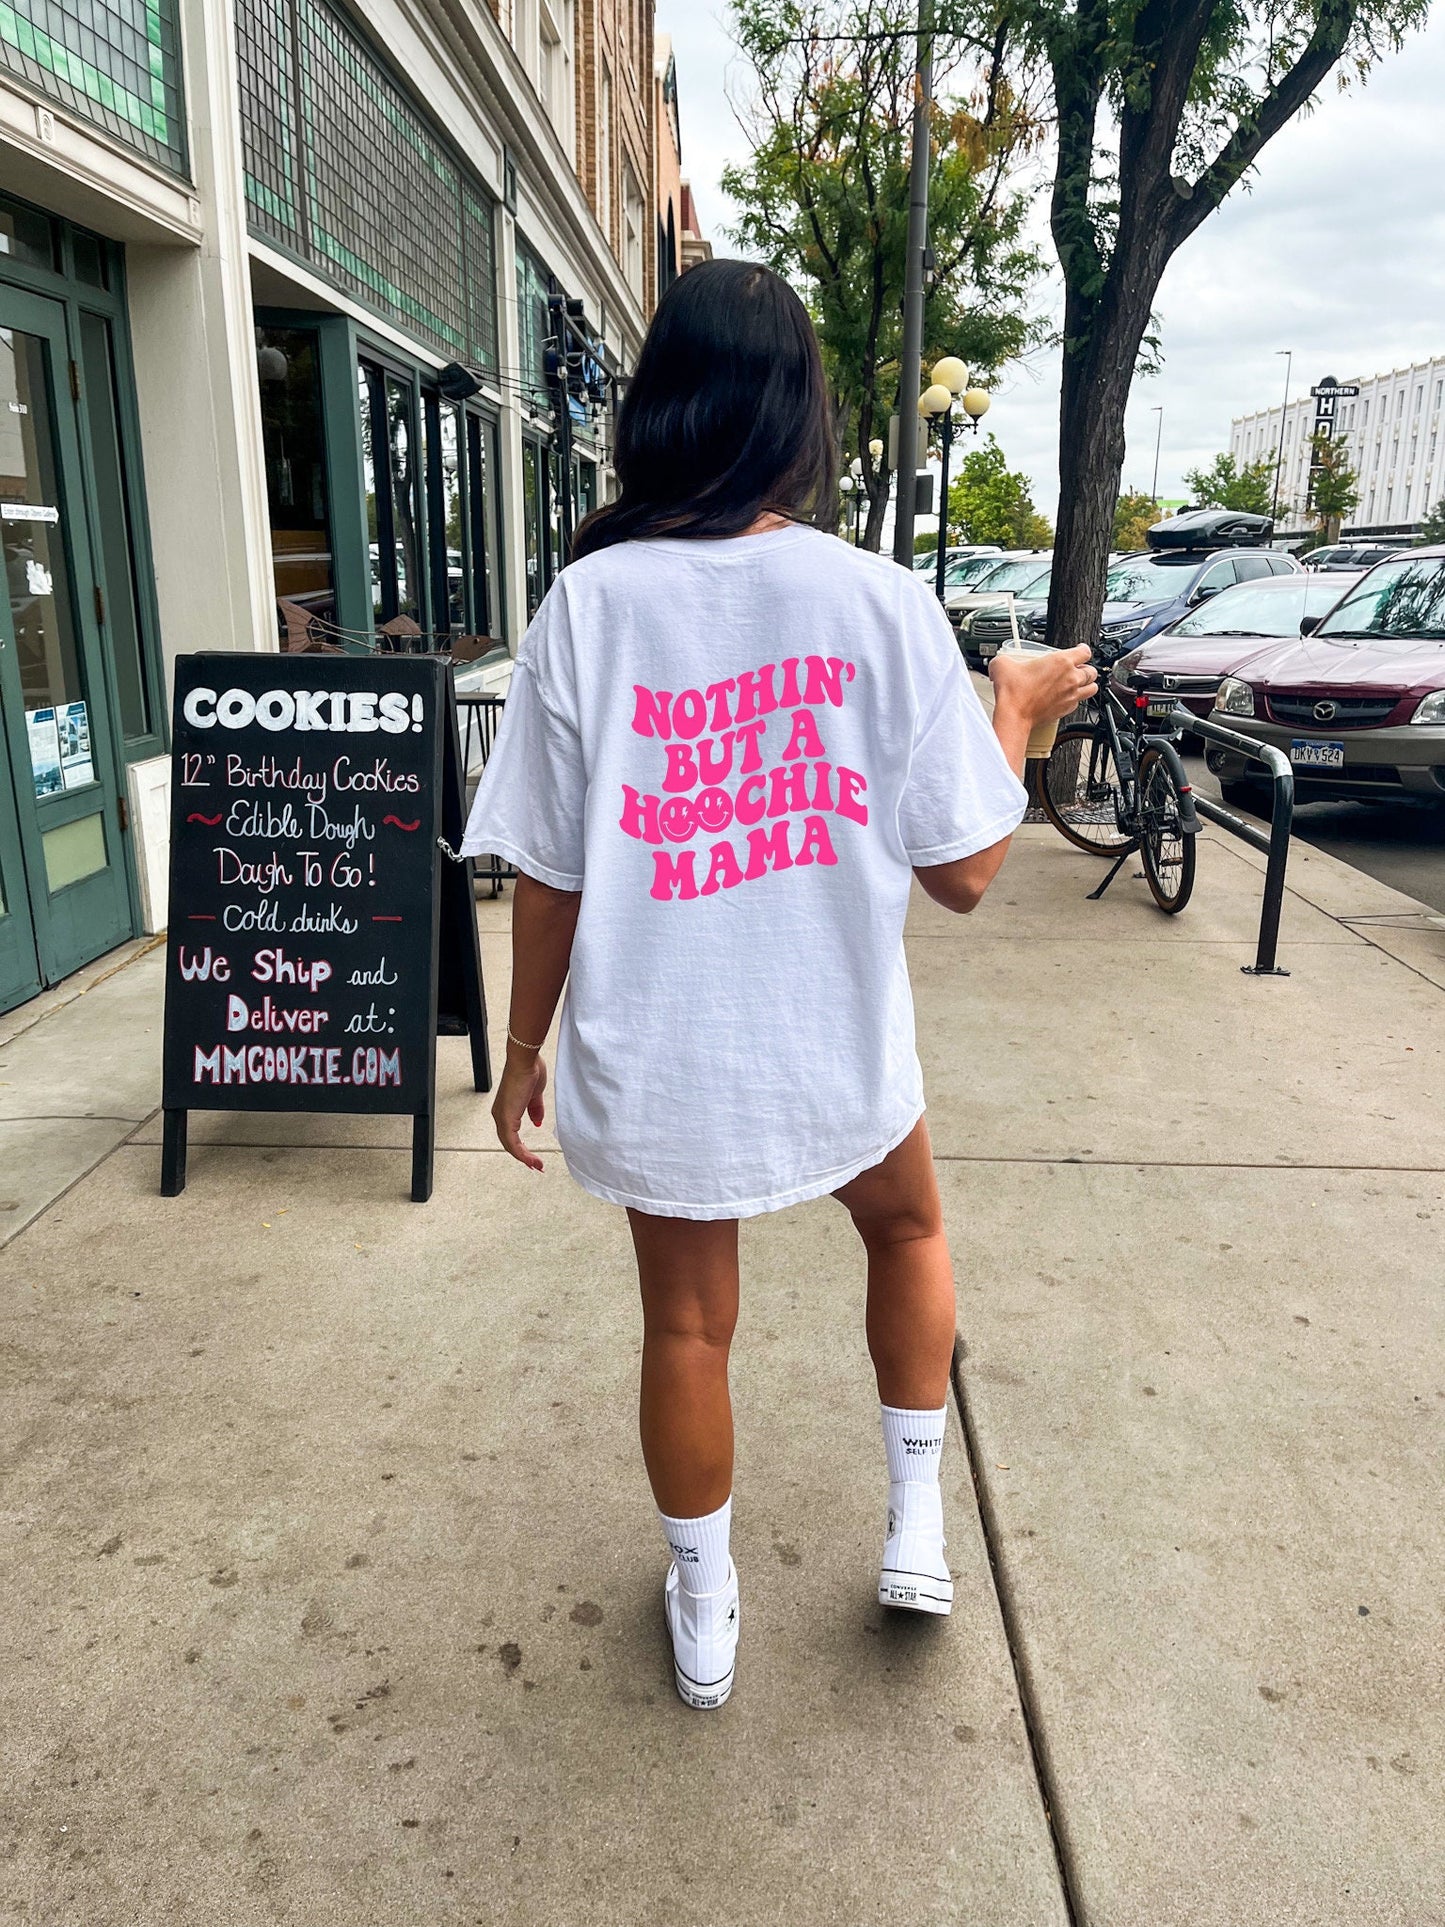 Nothin’ but a Hoochie Mama Shirt, Hoochie Mama Shirt, Print on the back, Adult Humor shirt, Gift for her, Unisex , Size up for oversizing